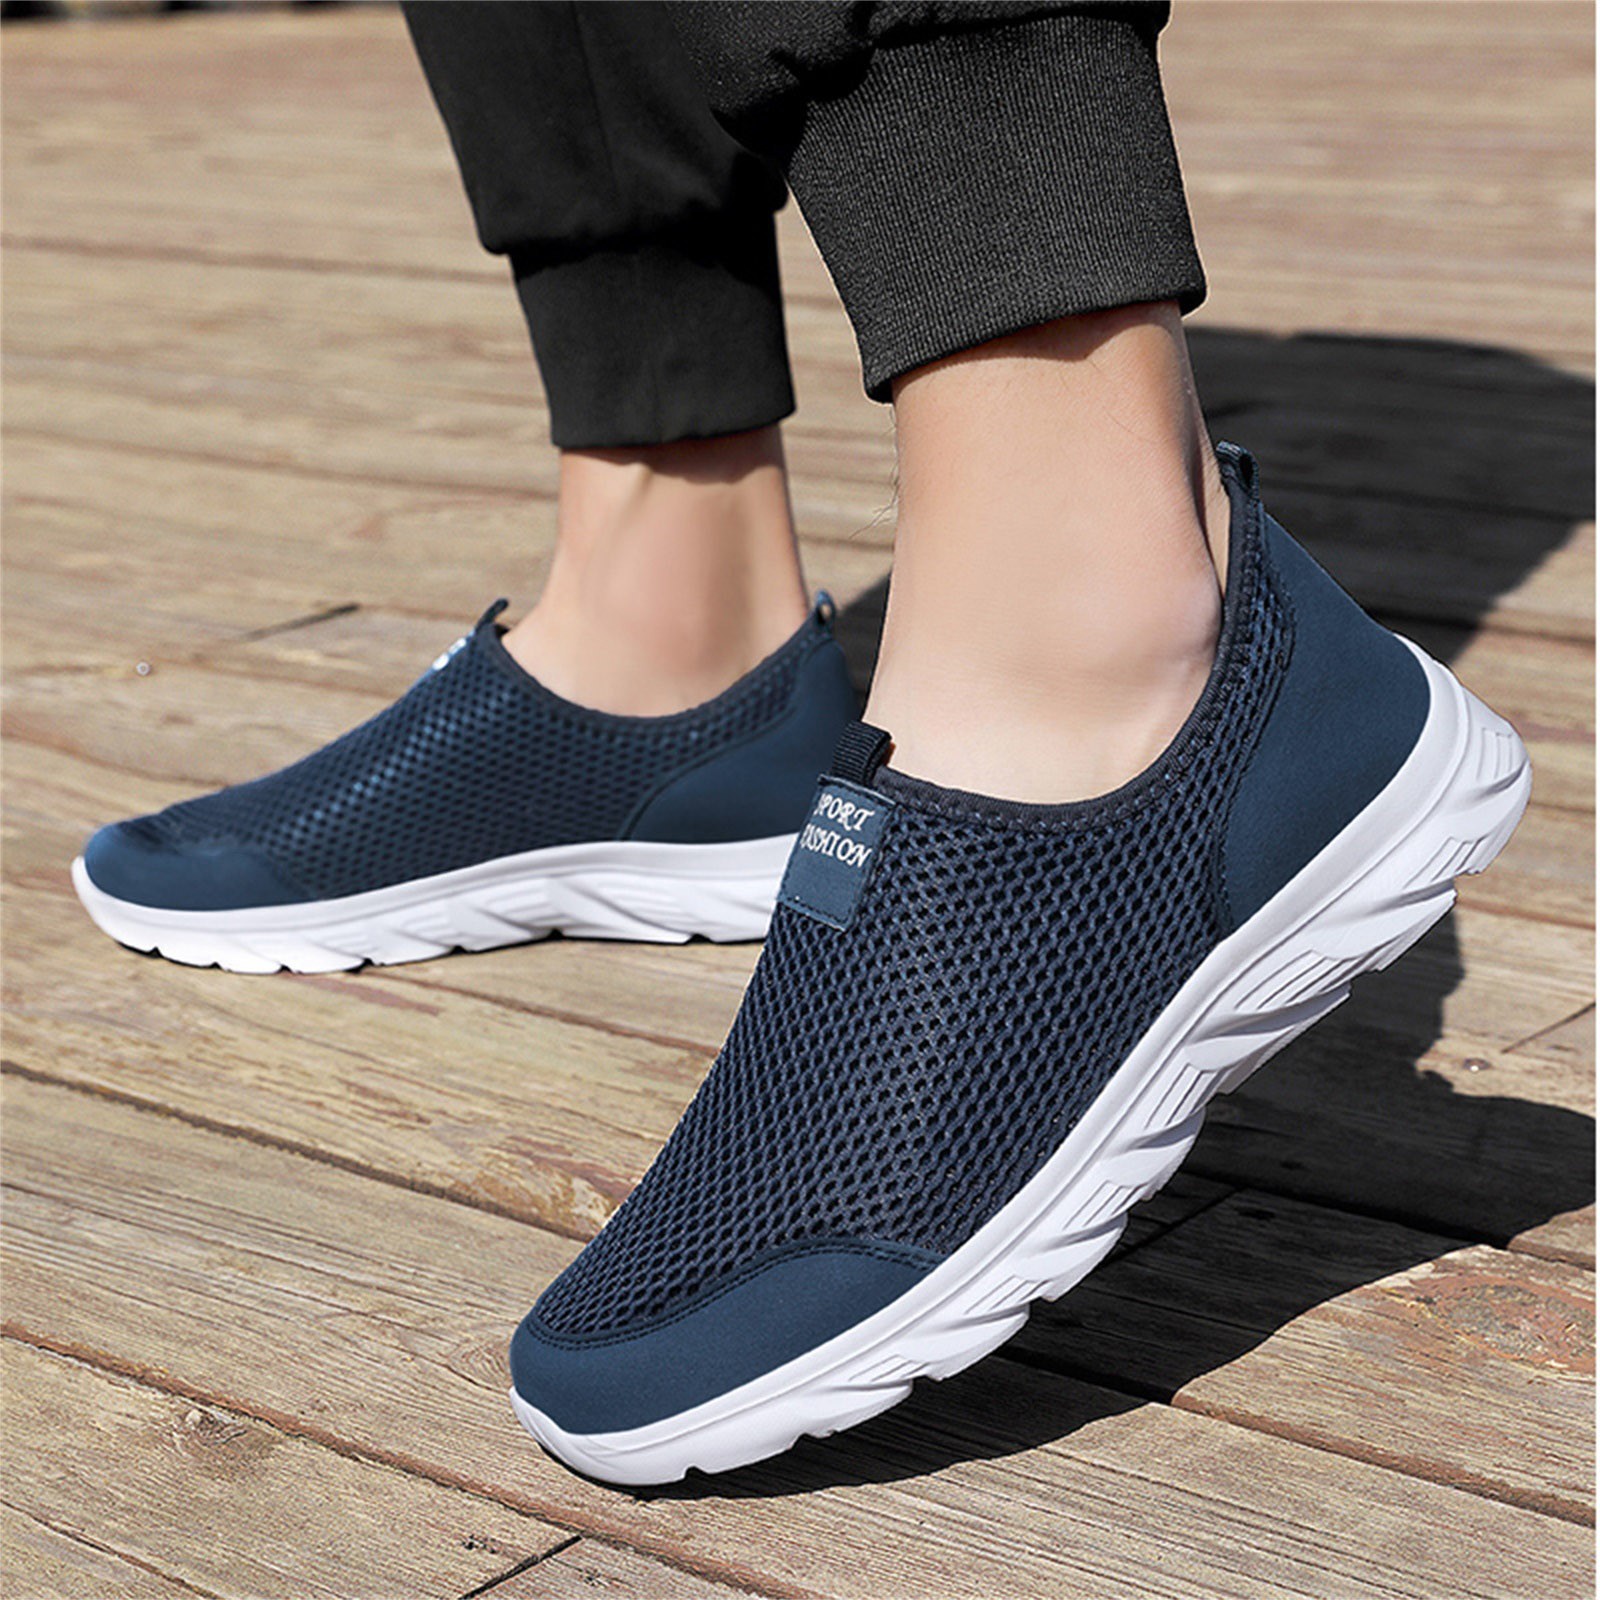 CBGELRT Shoes for Men Casual Men's Sneakers Men's Tennis Shoes Men Shoes Summer Lightweight Breathable Casual Shoes Single Mesh Sneakers Casual Running Shoes Male Blue 42 - image 5 of 5